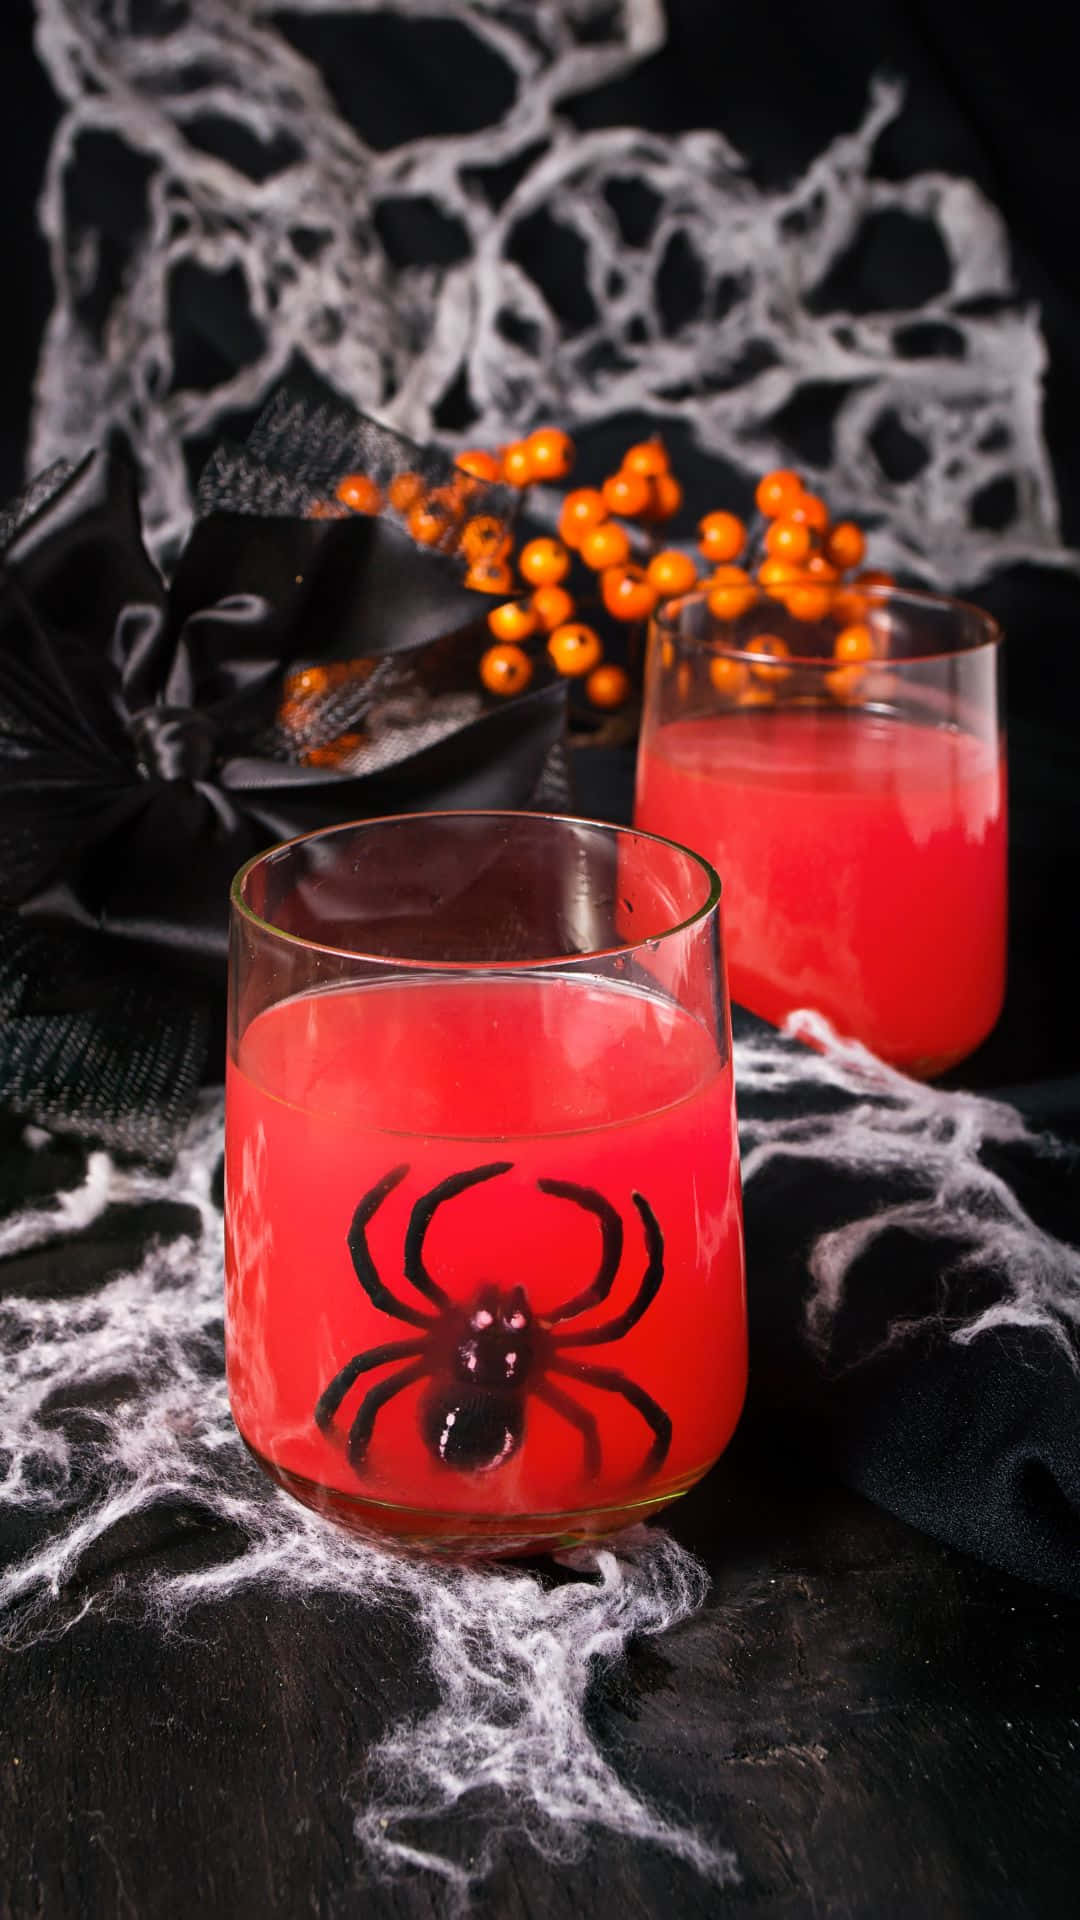 Get spooked this Halloween with a delicious spooky cocktail! Wallpaper